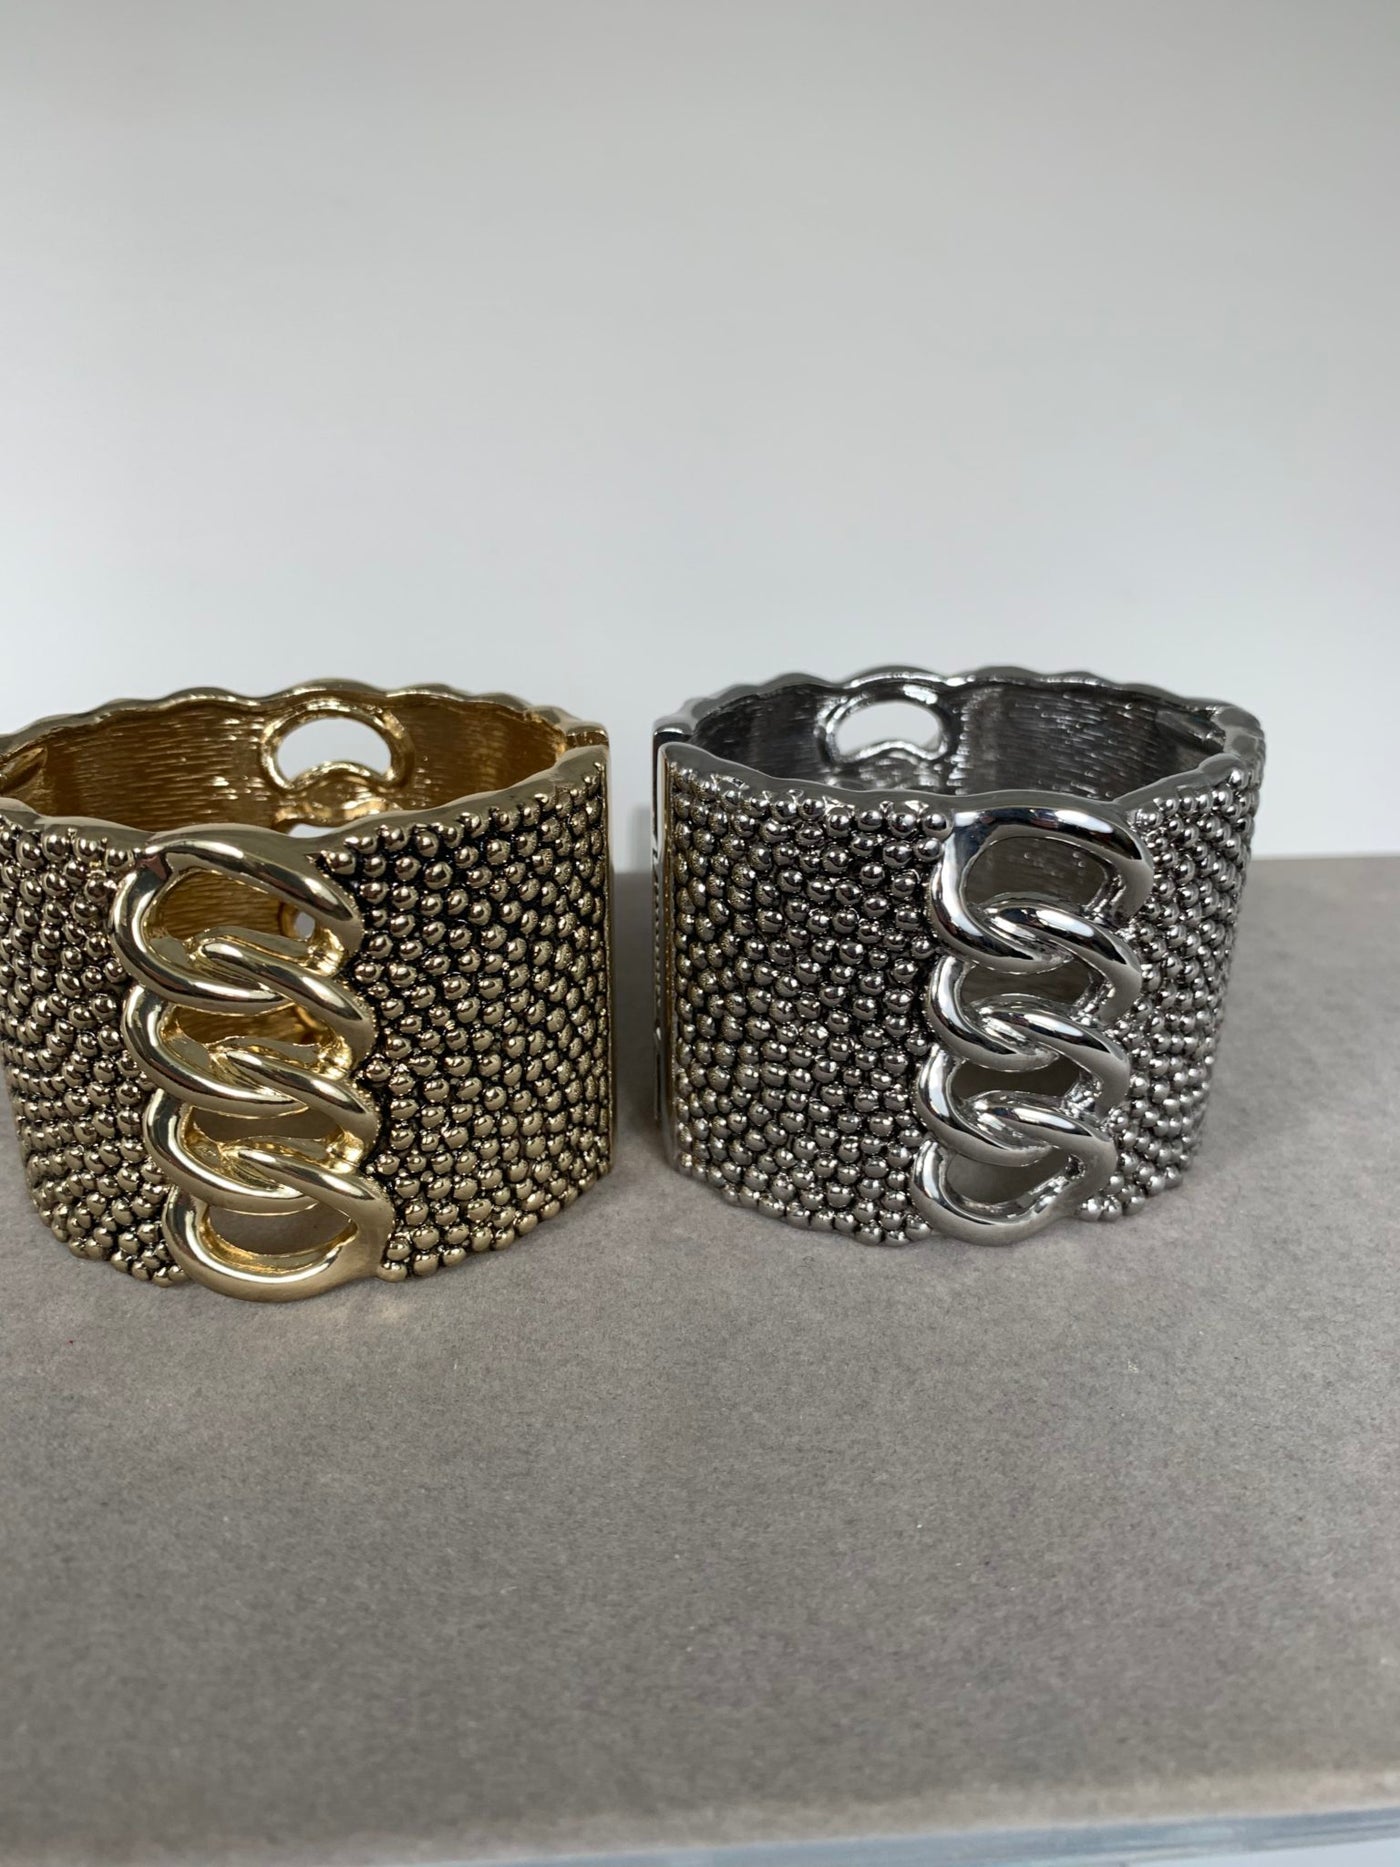 Beaded Body Wide Bangle in Silver Tone